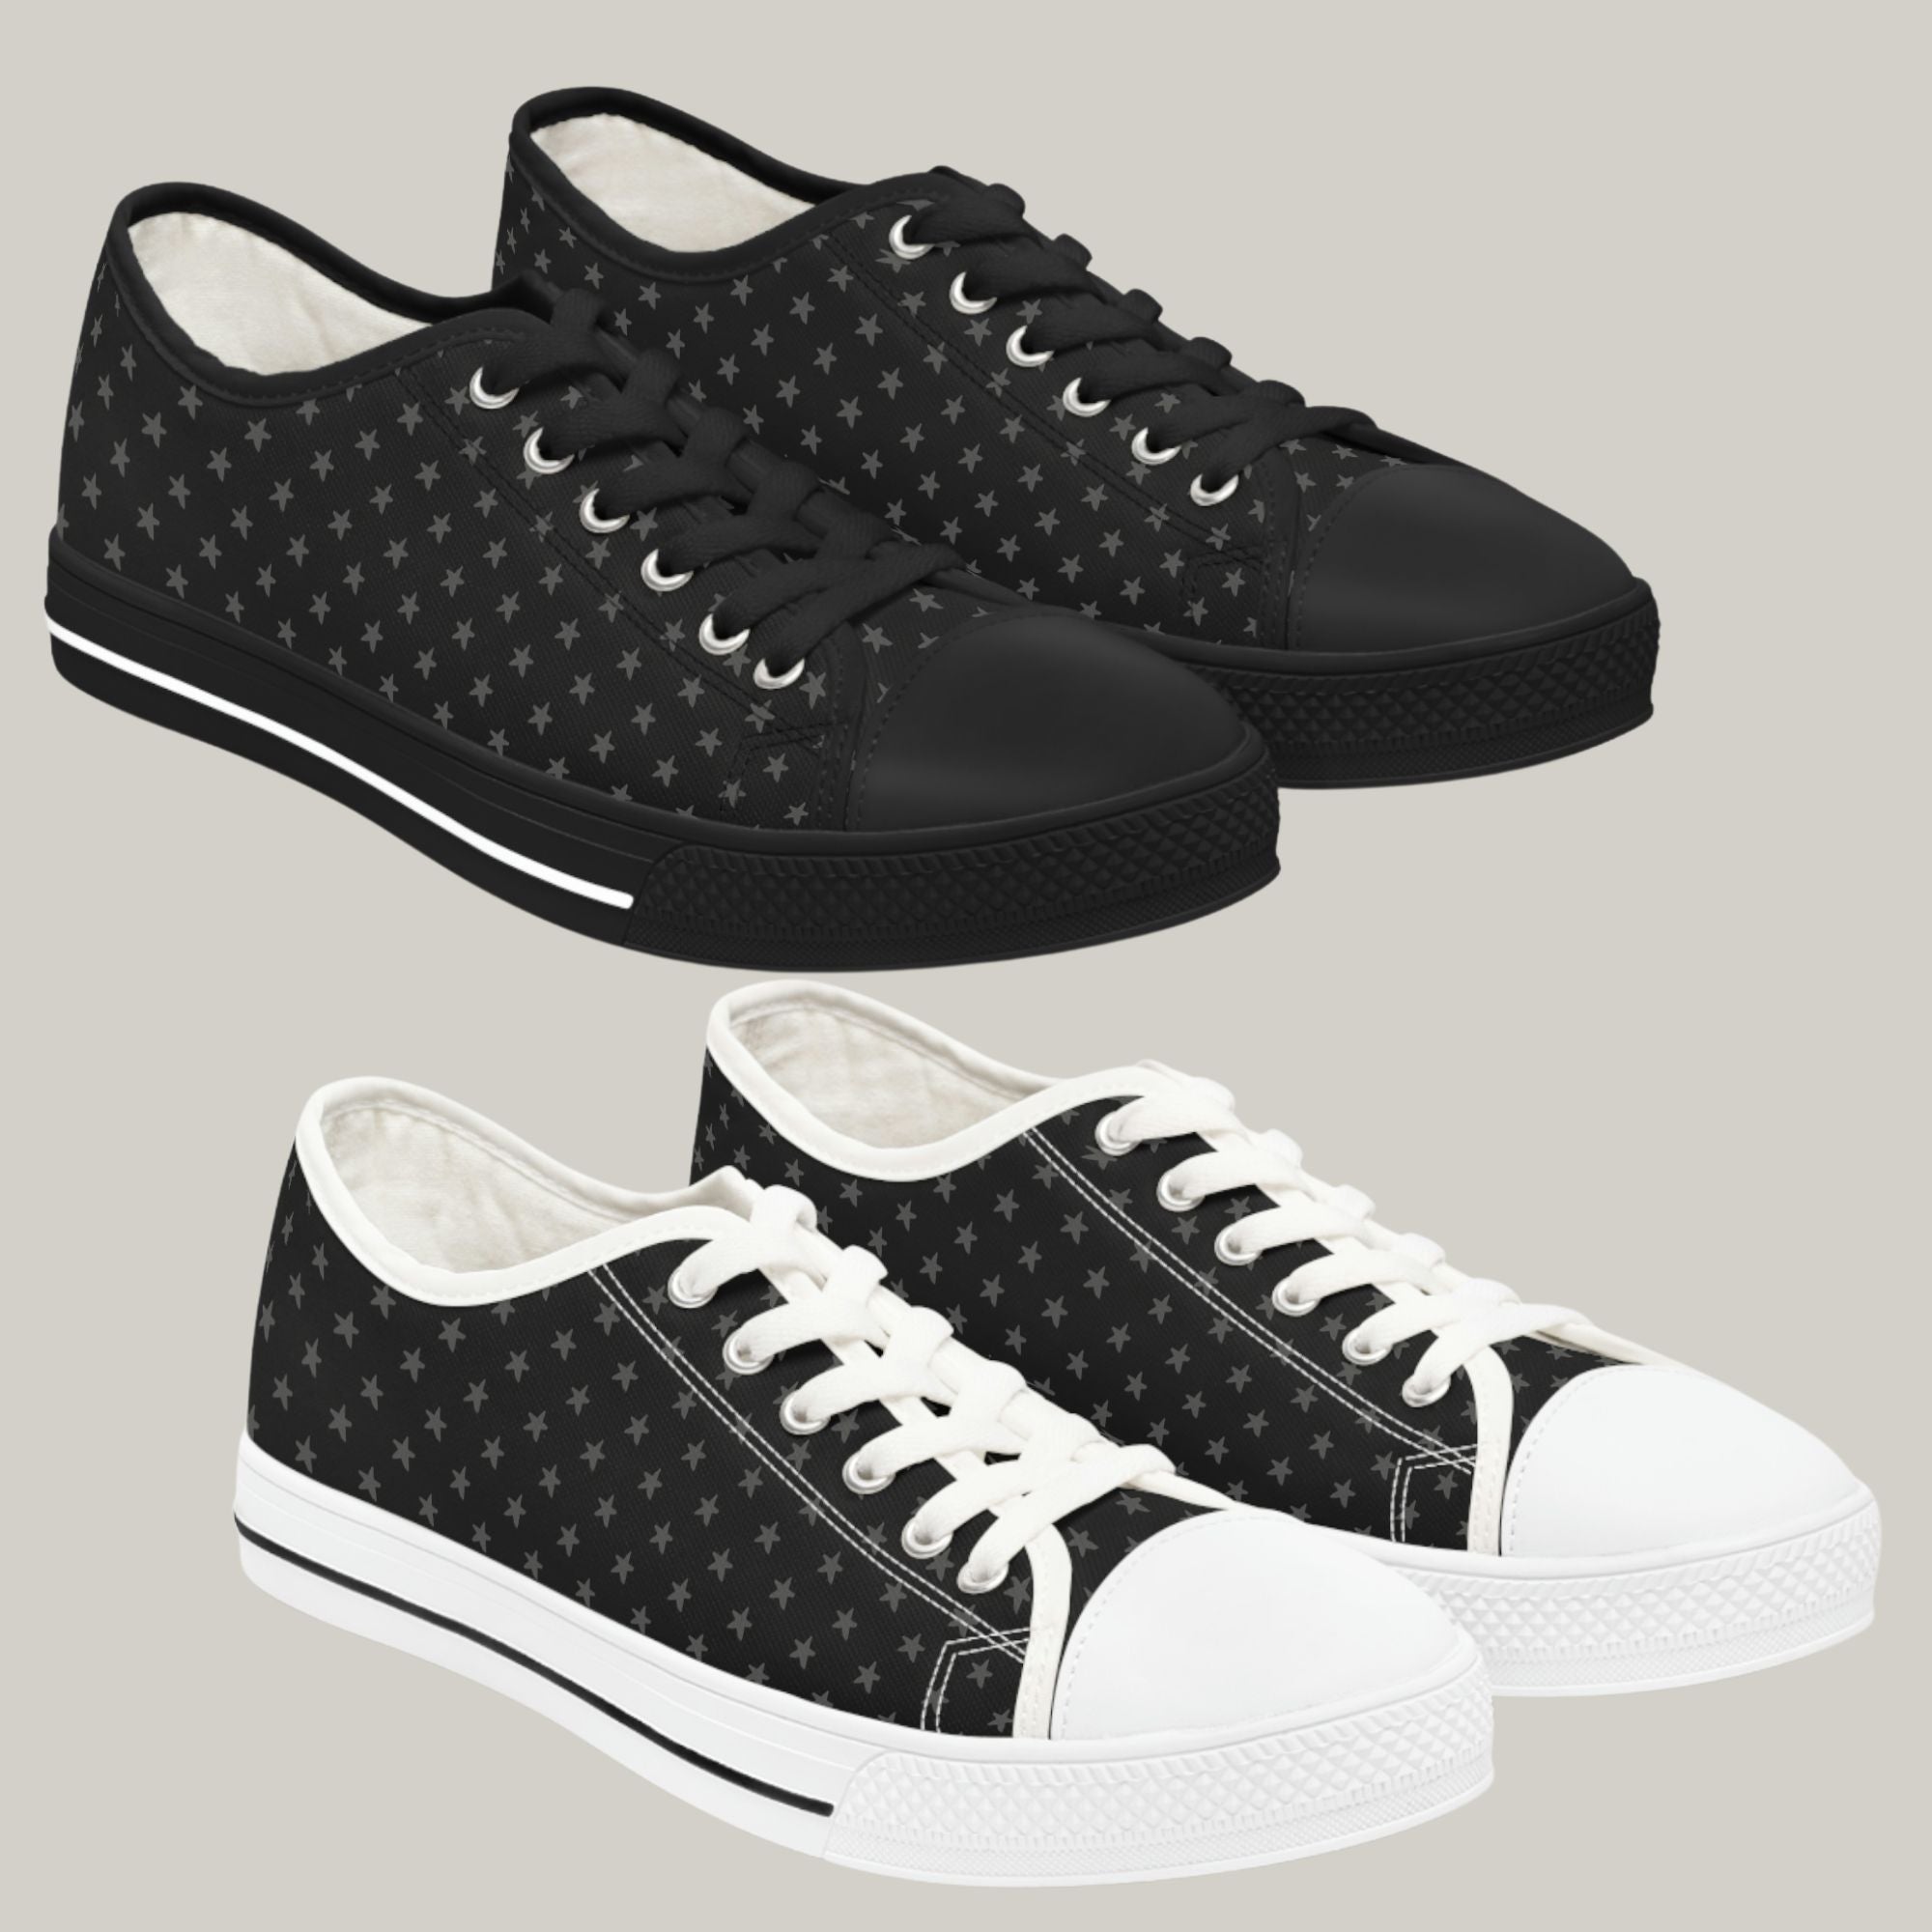 MY STARS GRAY & BLACK - Women's Low Top Sneakers Black and White Soles